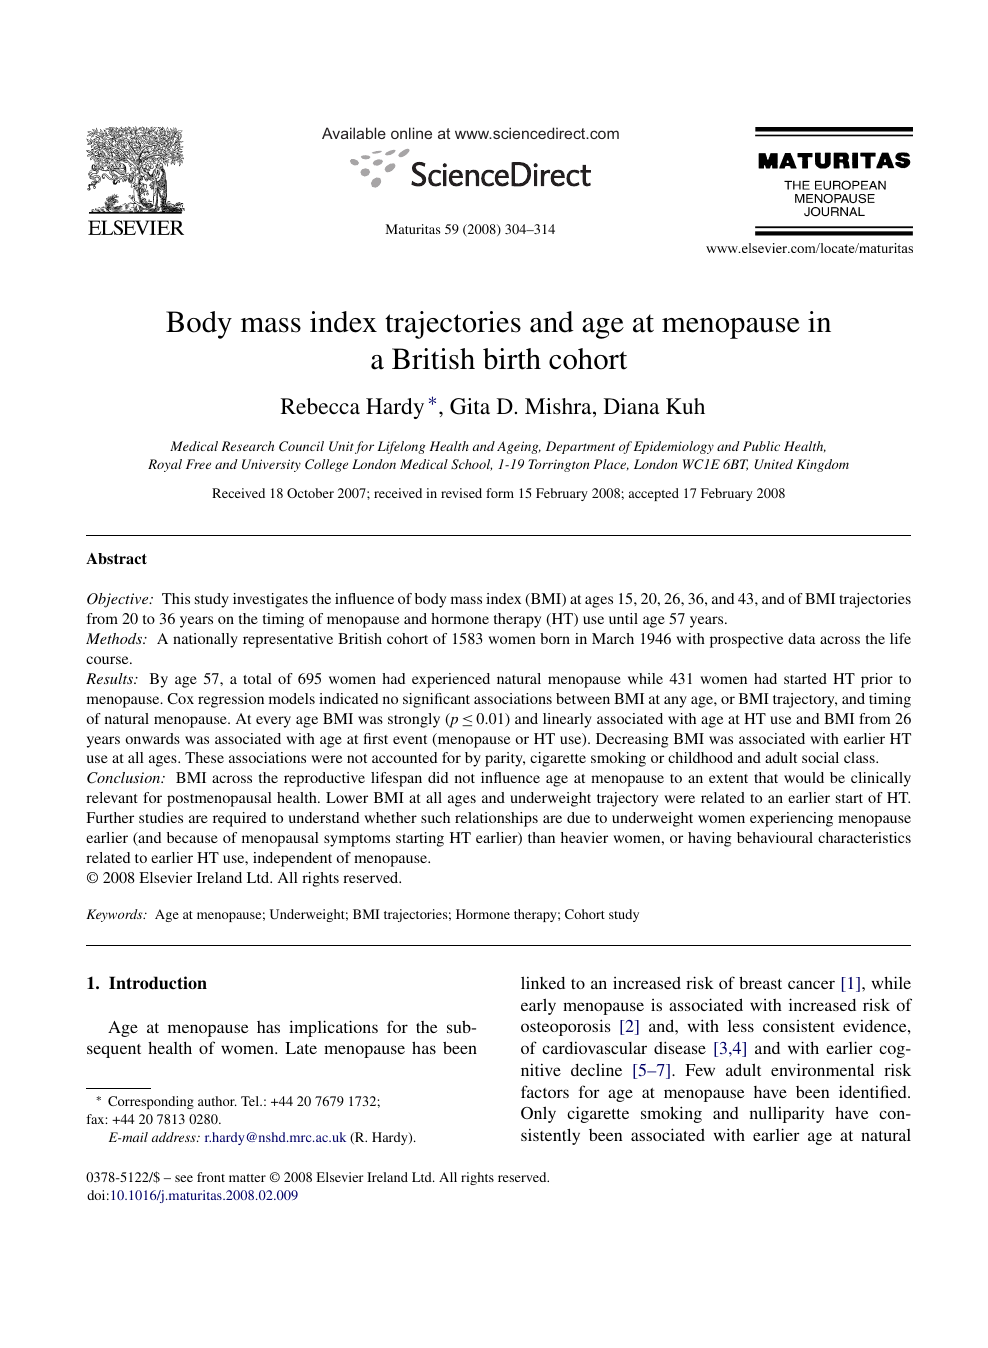 Body Mass Index Trajectories And Age At Menopause In A British